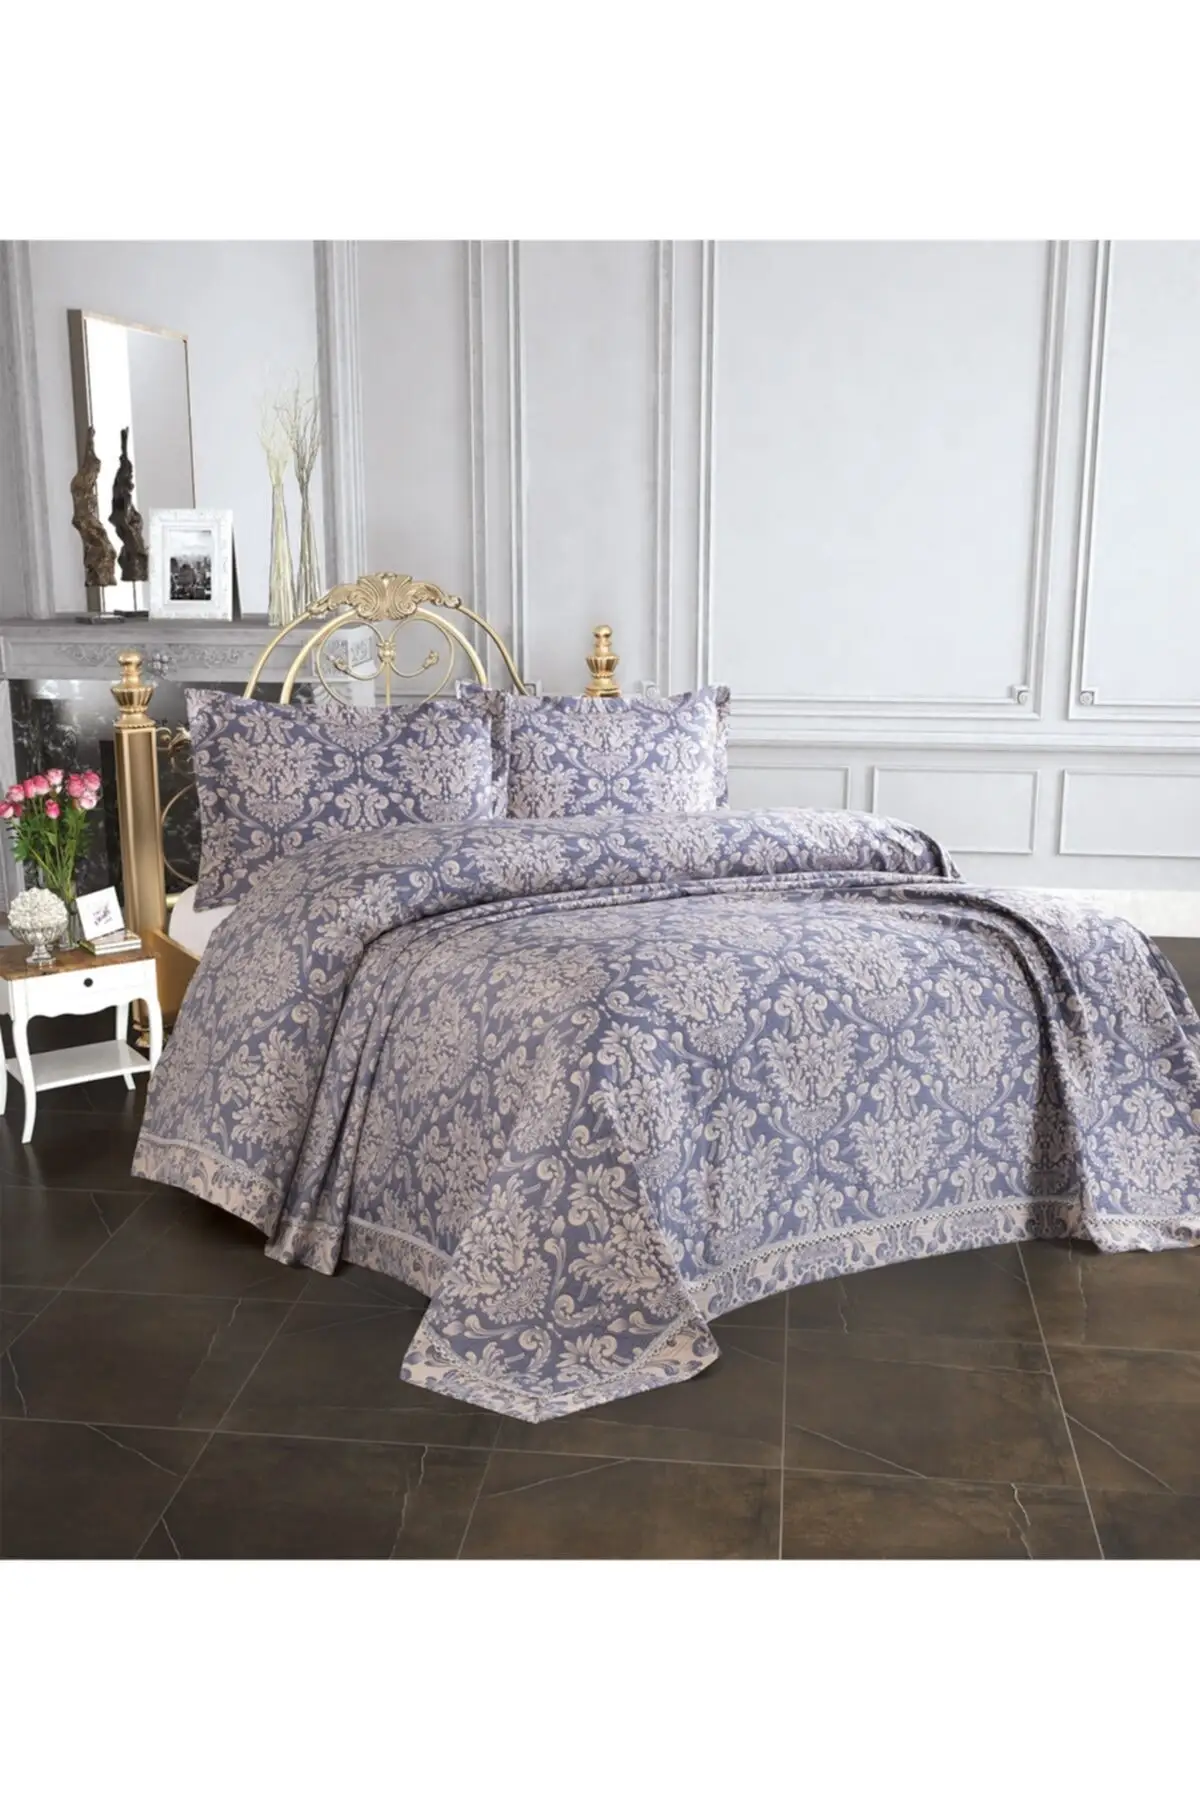 

Bedspread Double 10357 Blue Damask Pattern Jacquard Woven Pike Fabric Cotton-Polyester 240x260 Bed Sheet Free